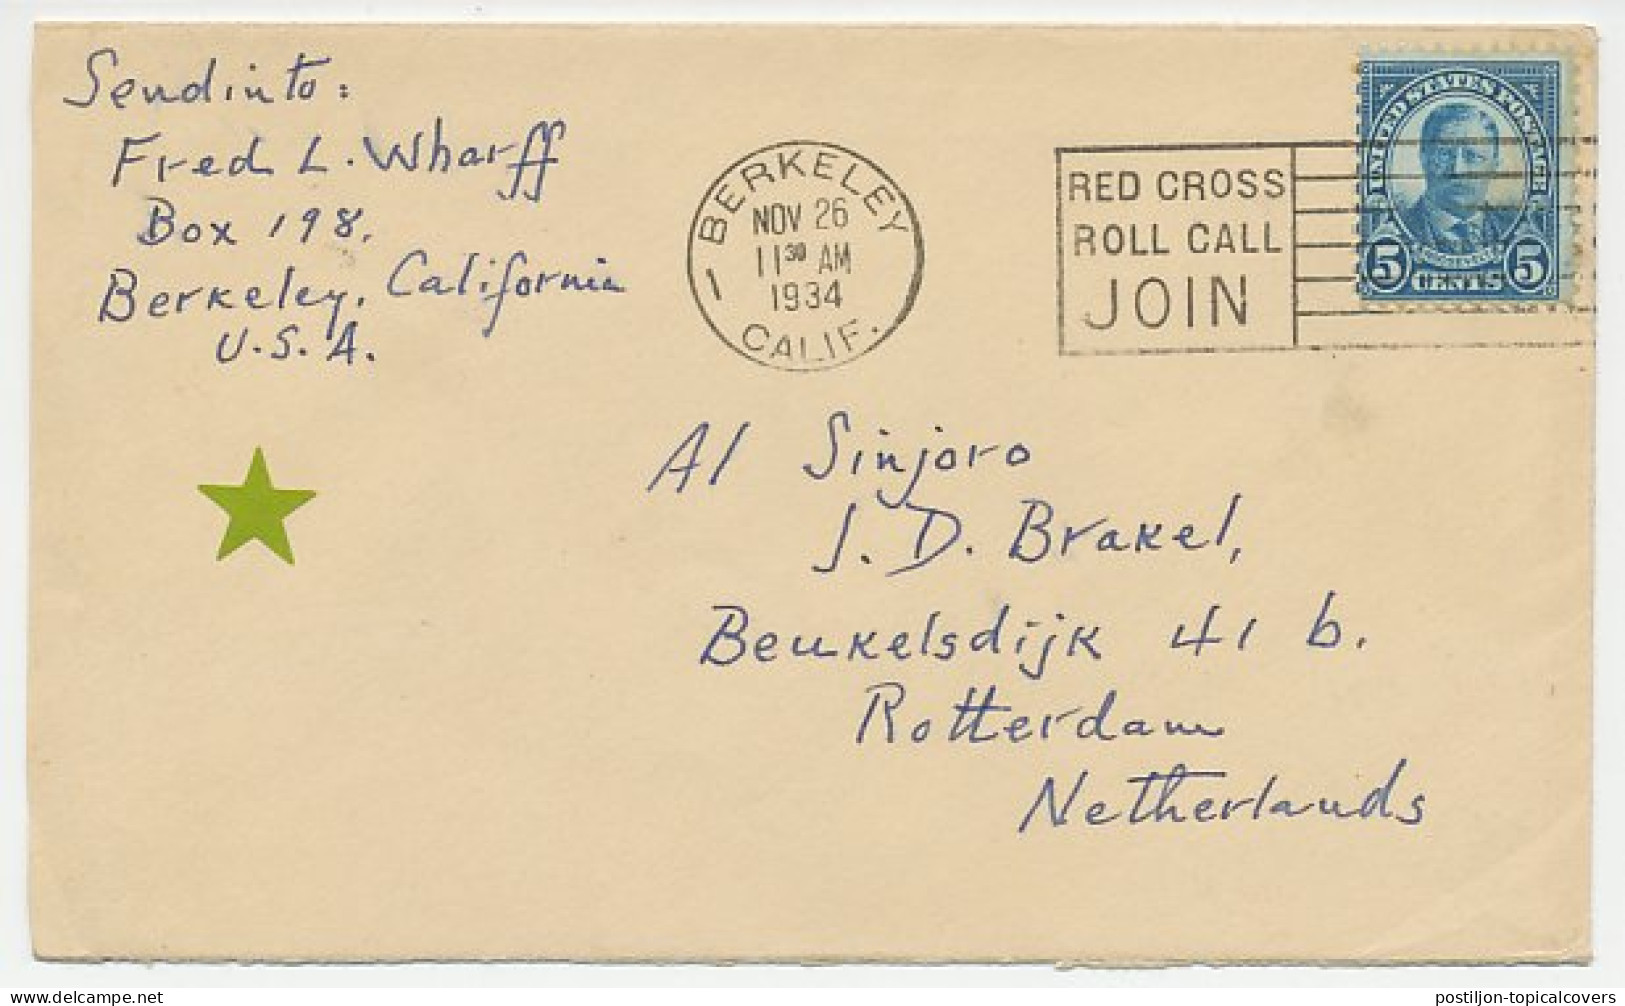 Cover / Postmark USA 1934 Red Cross - Roll Call Join - Red Cross